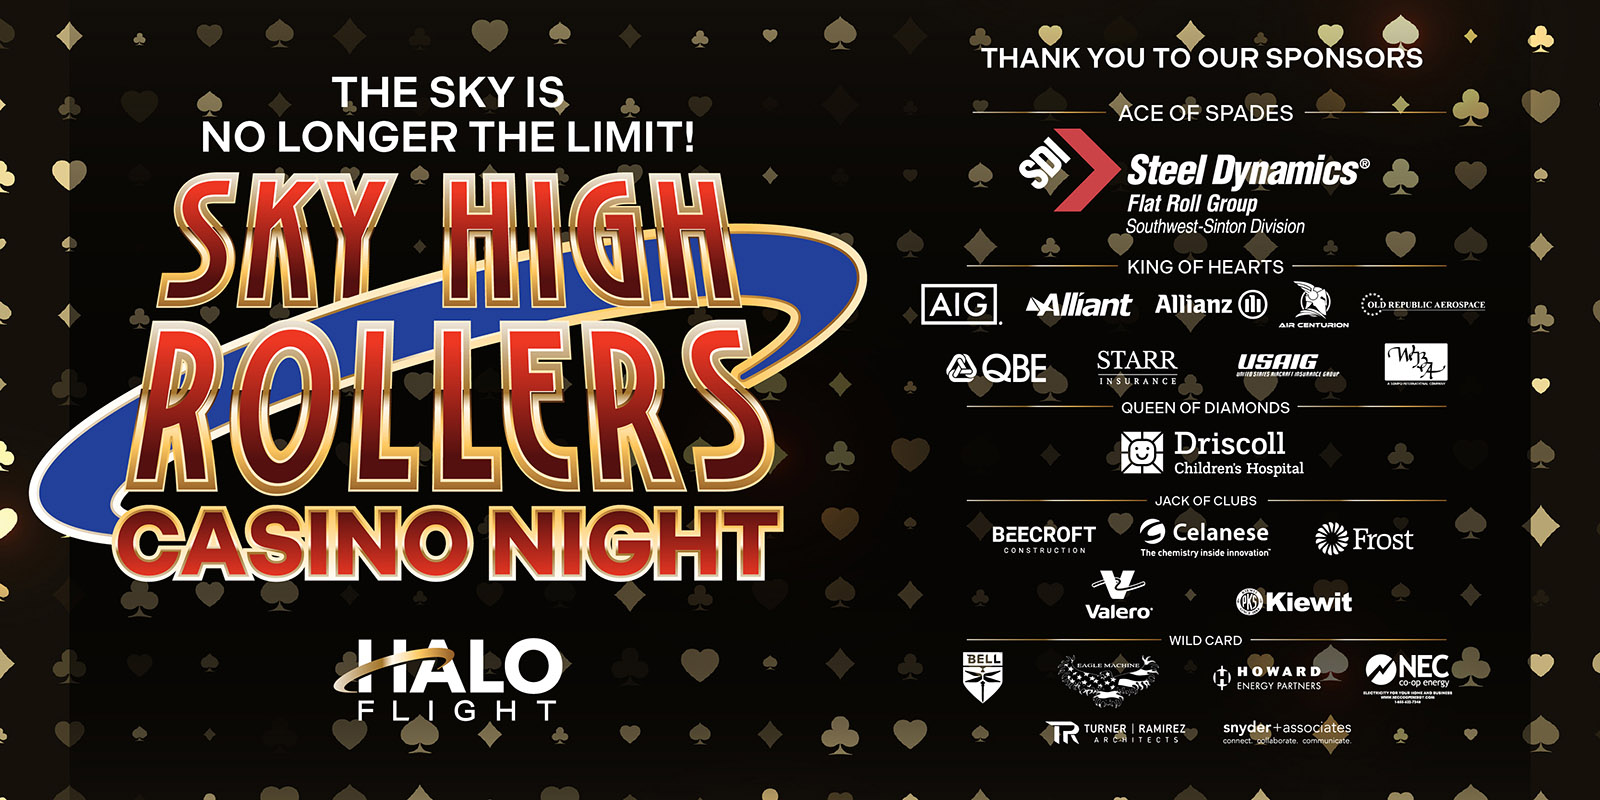 Sky High Rollers Casino Night Thank You